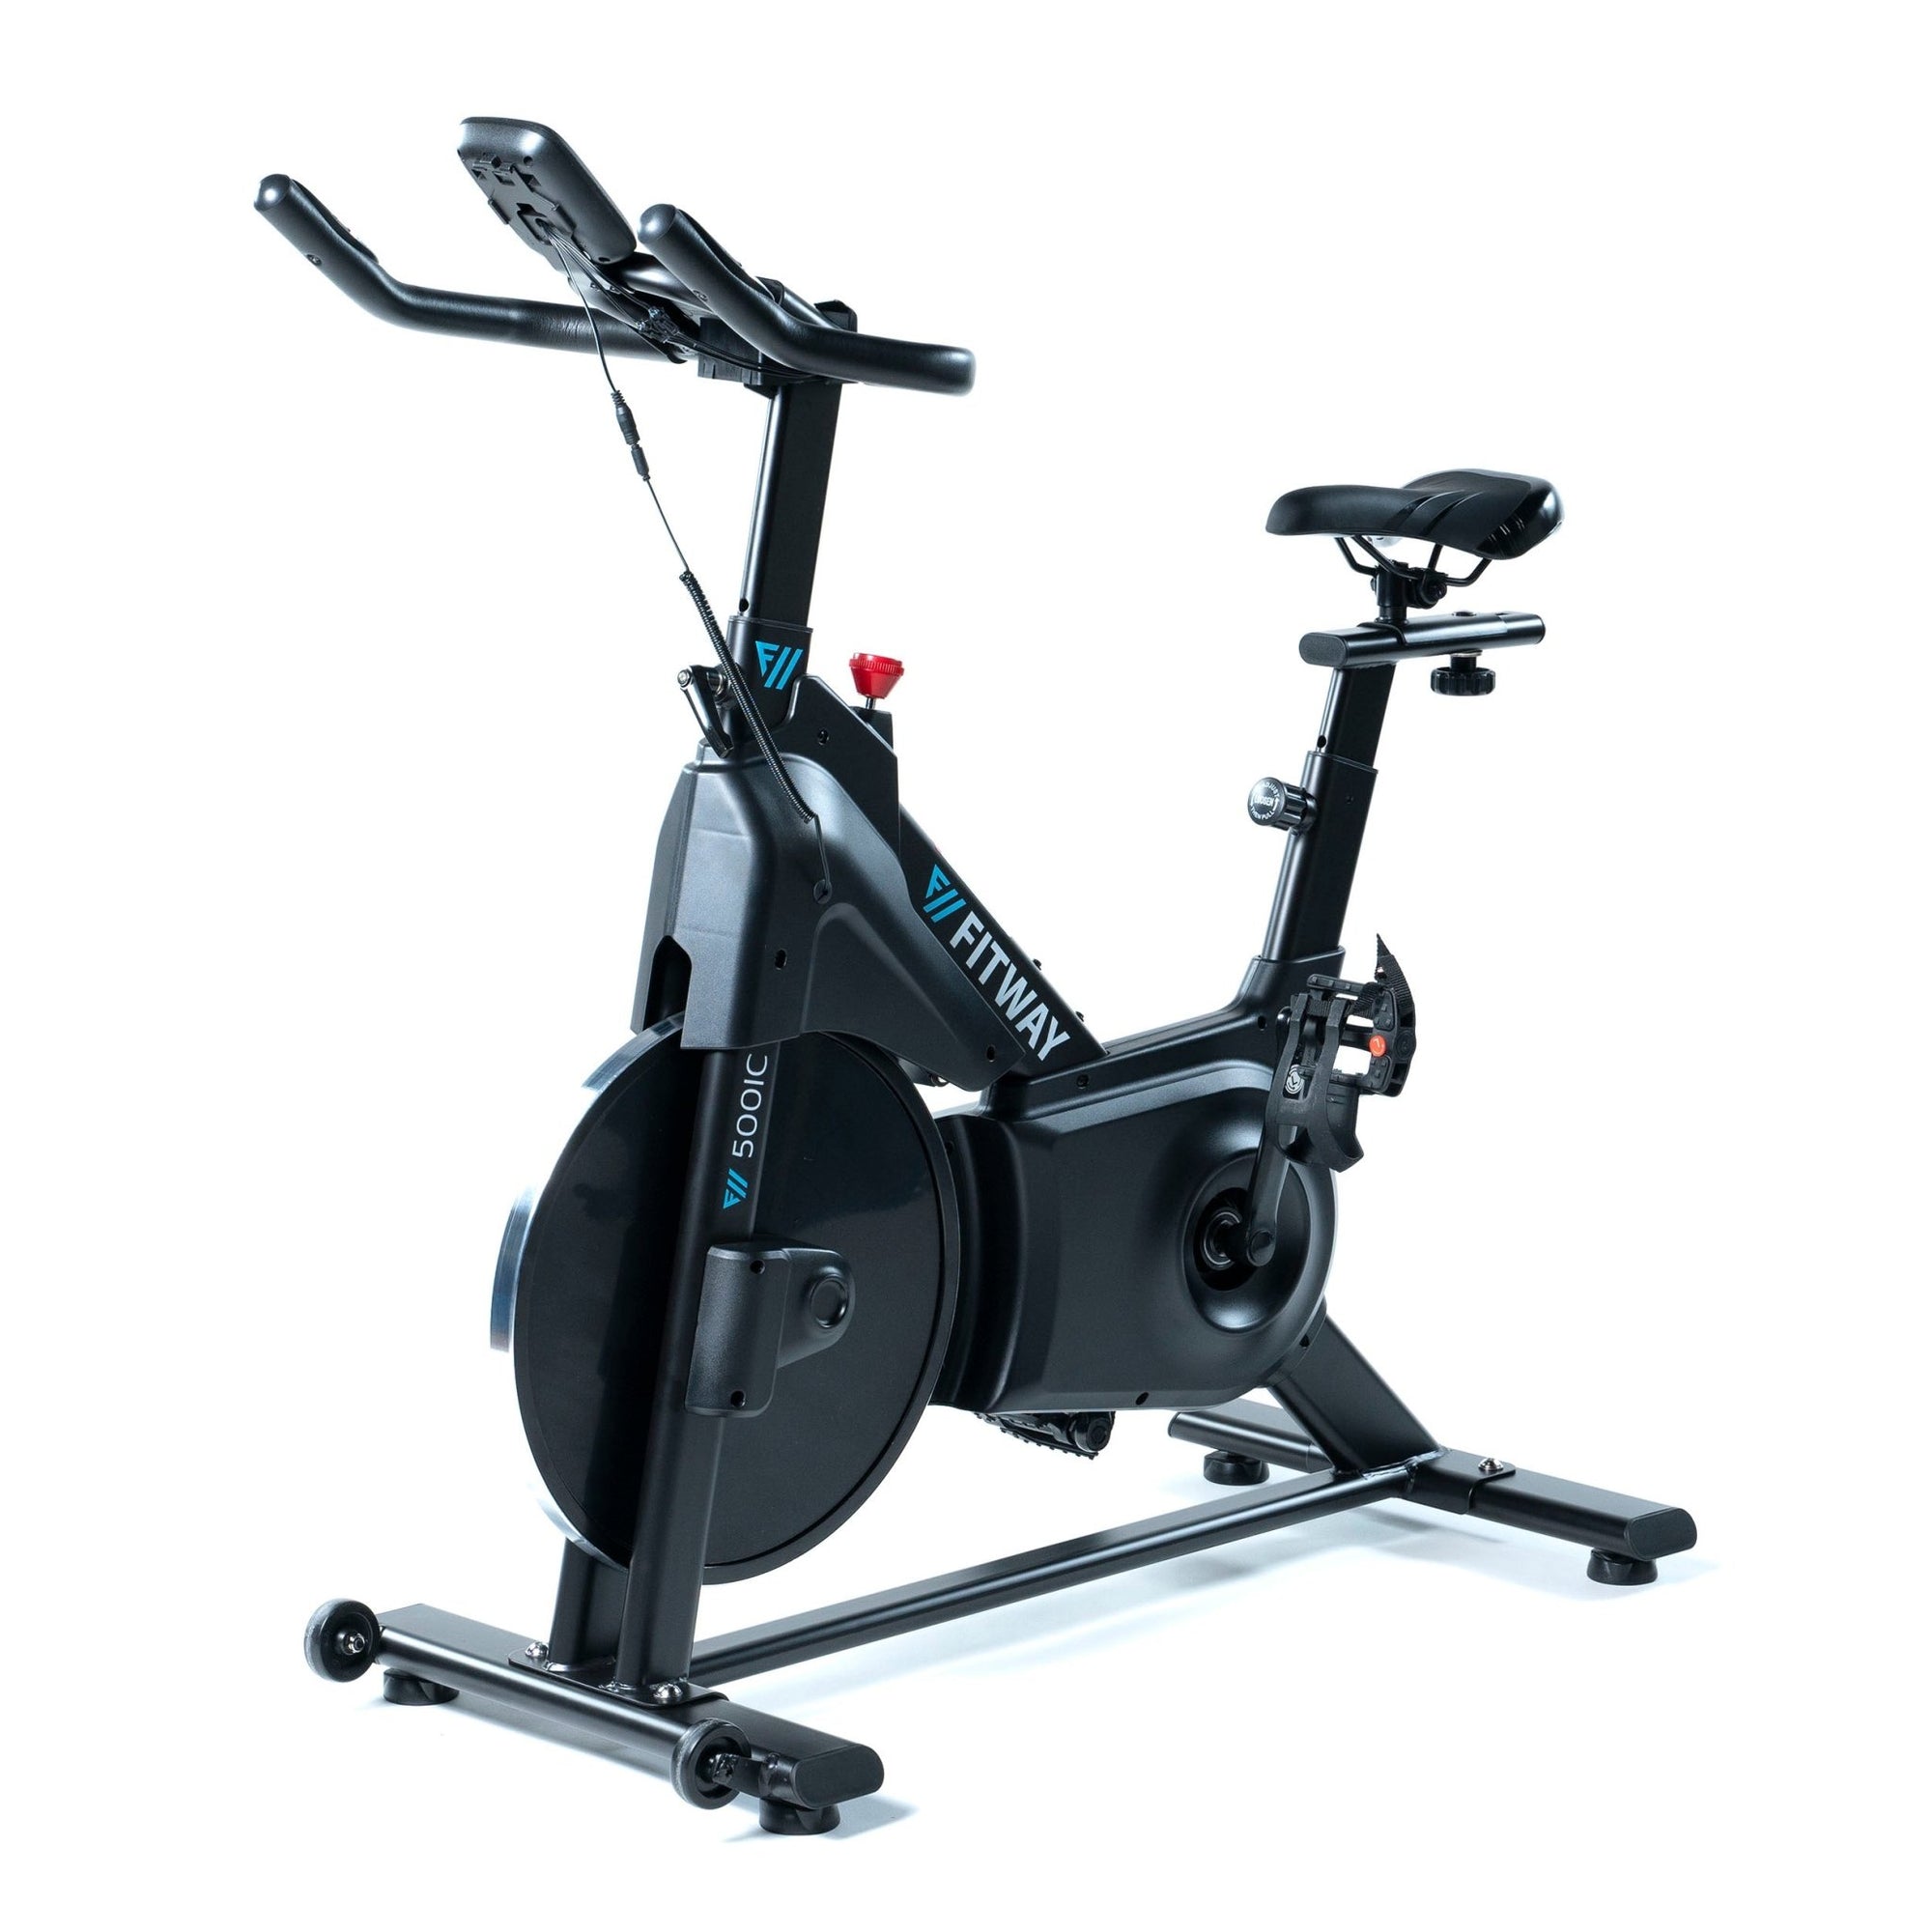 FitWay Equip. 500IC Indoor Cycle full view 